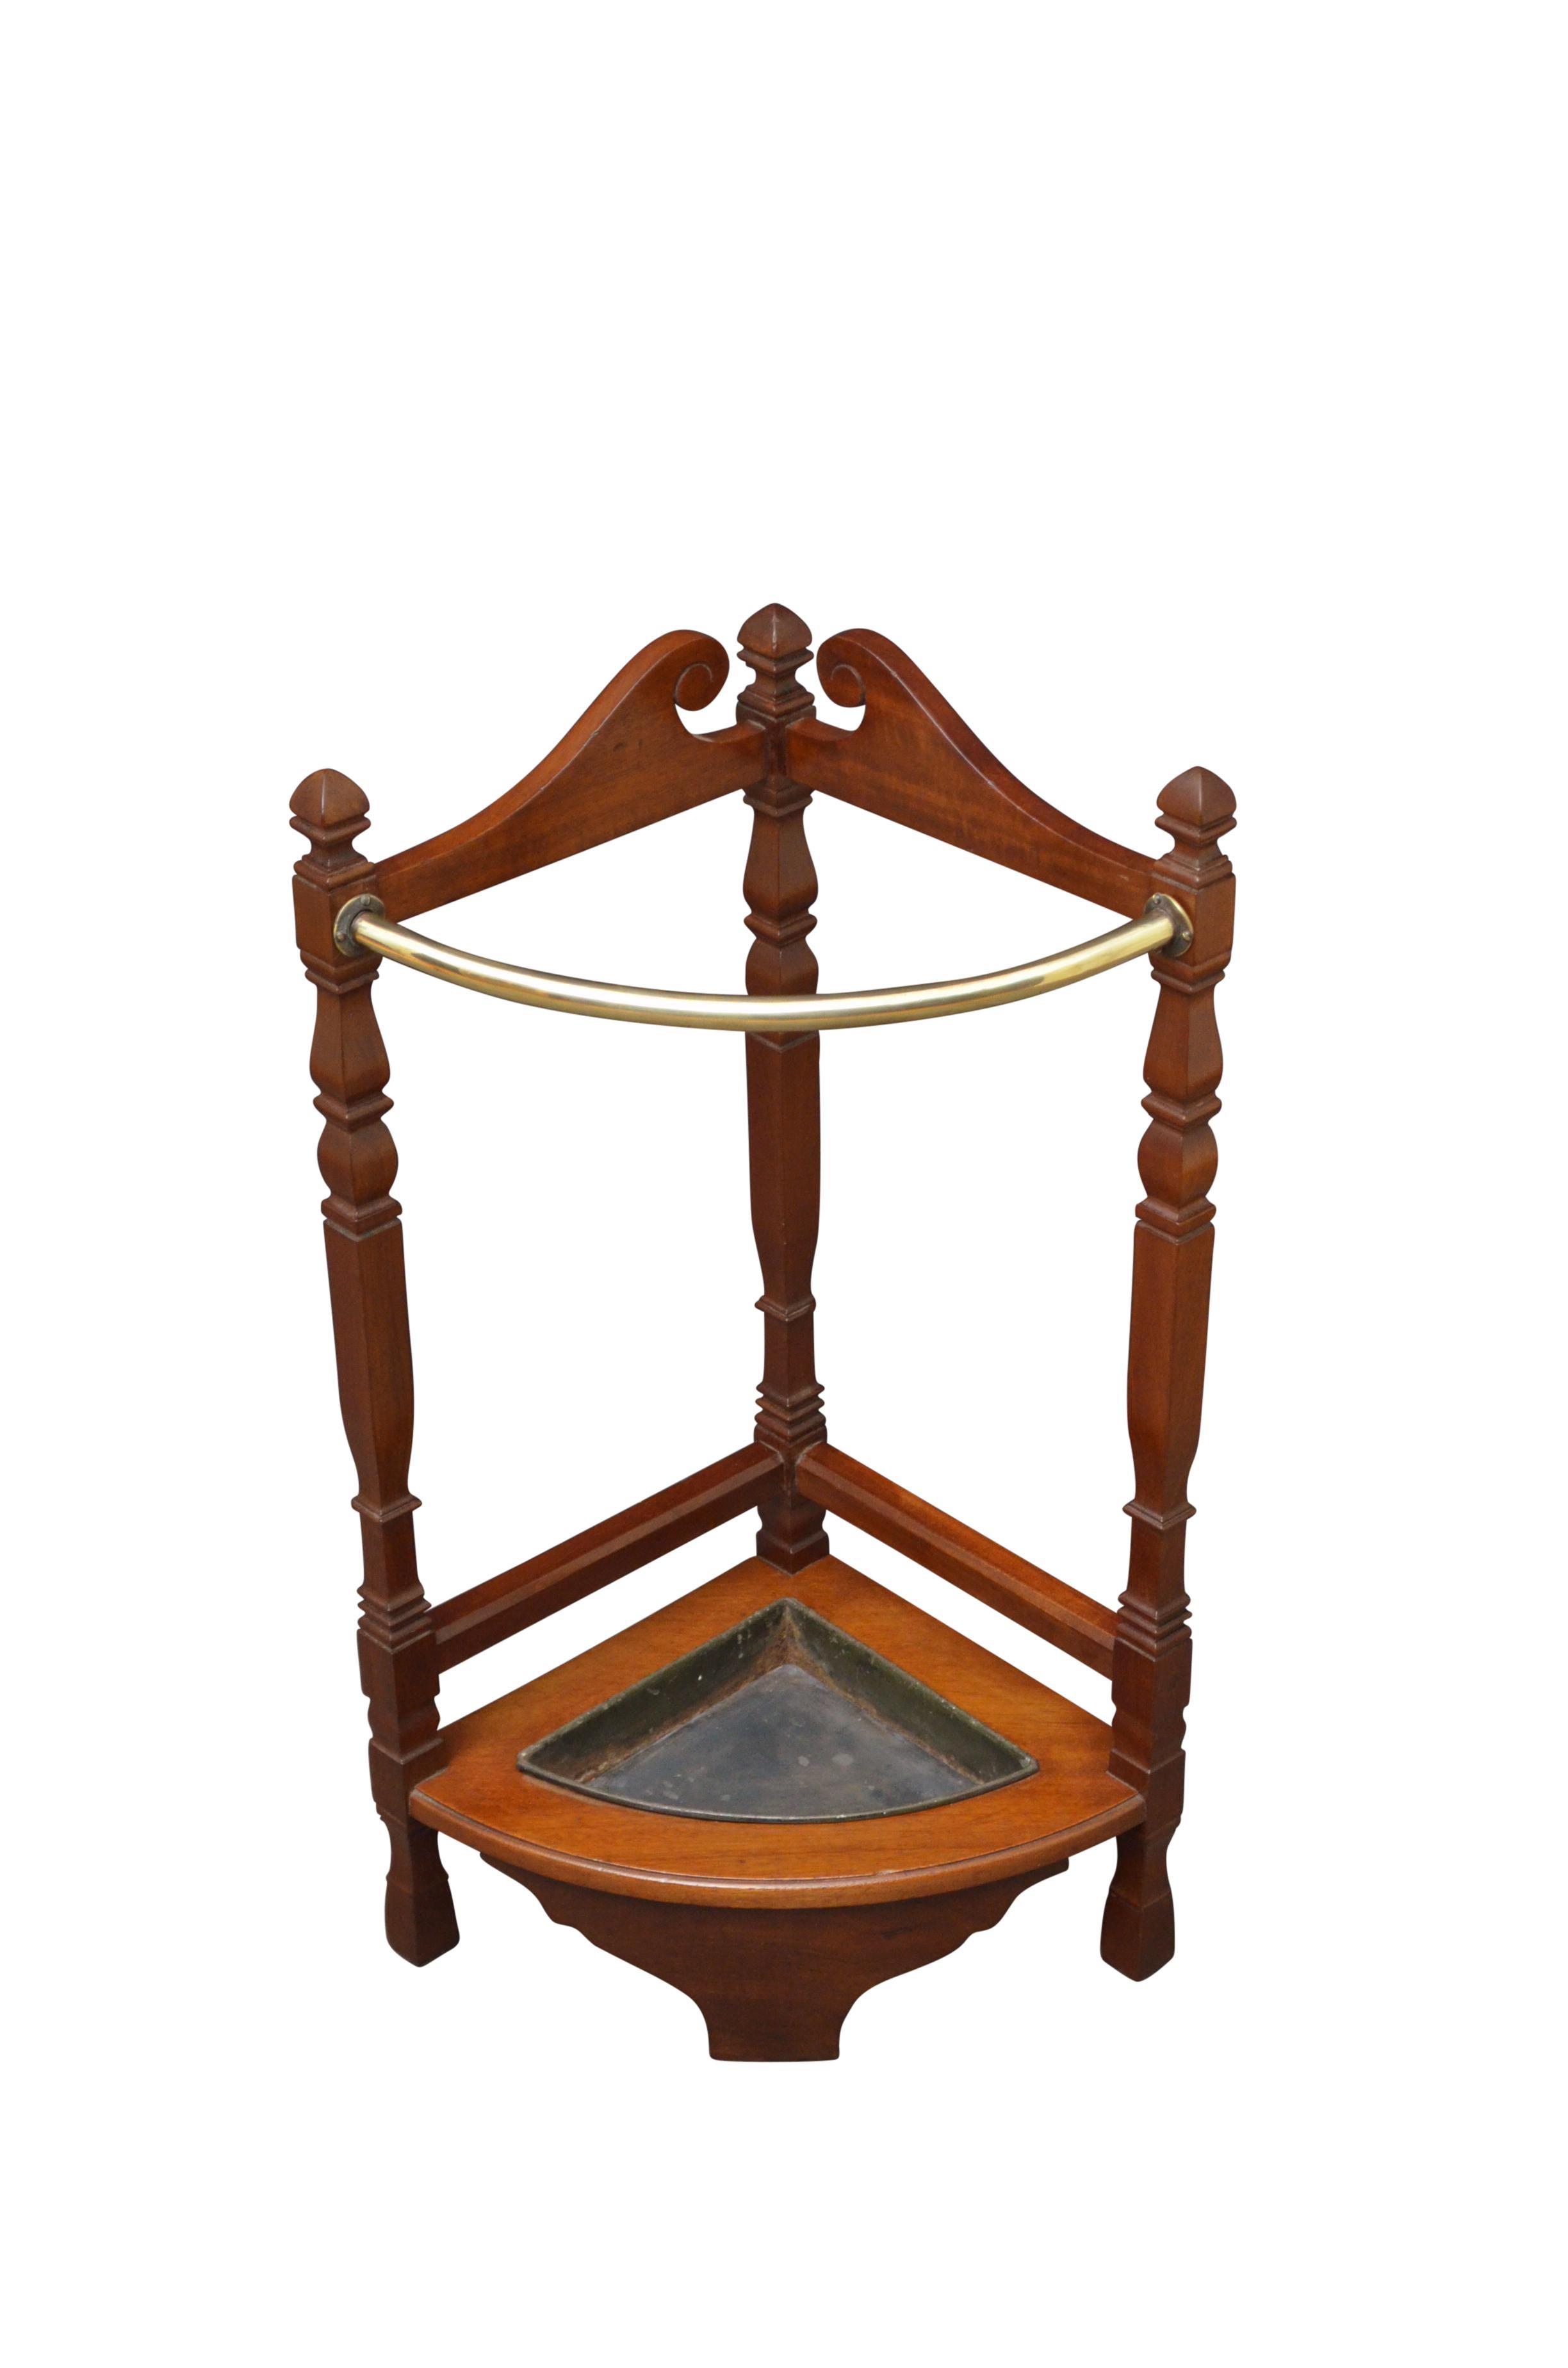 K0374 stylish Edwardian corner umbrella stand in mahogany, with carved supports and removable drip tray. Ready to use at home. C1900
Measures: H 26.5” W 17” D 11.5”
H 67cm W 43cm D 29cm.